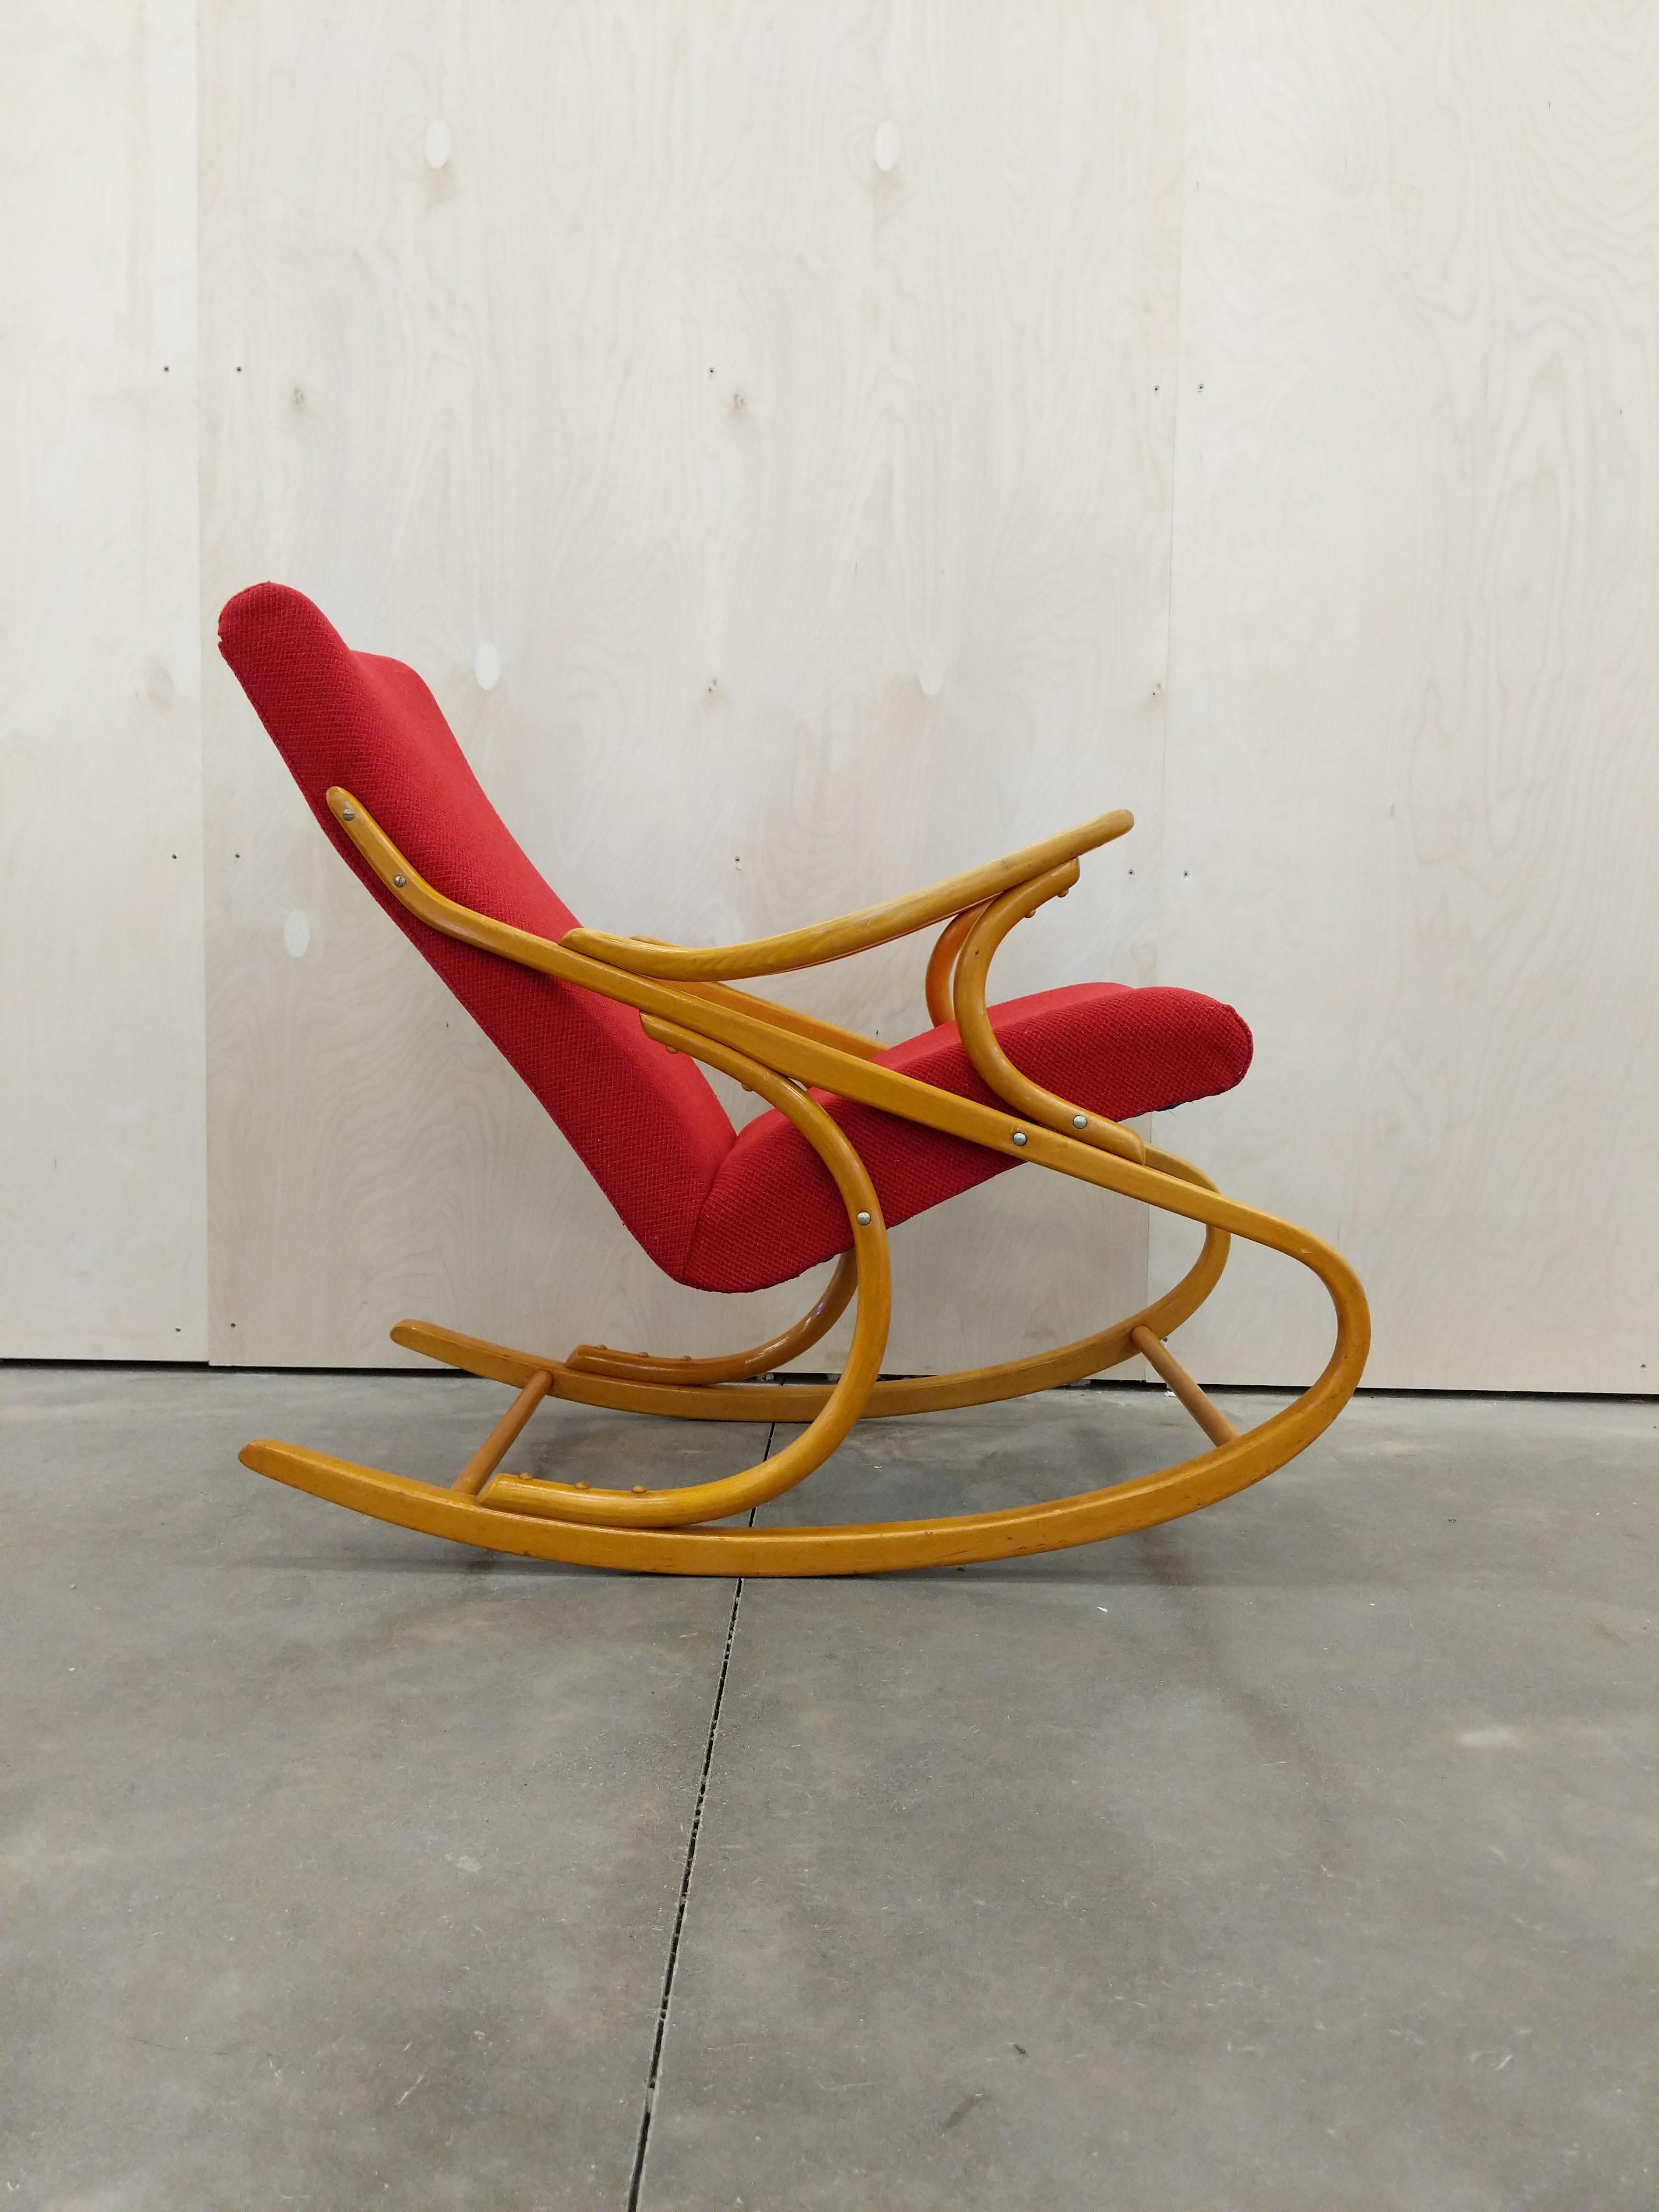 Authentic vintage Czech mid century modern rocking chair.

Designed by Antonin Suman for TON.

This chair is in excellent vintage condition with brand new Knoll upholstery.

If you would like any additional details, please contact